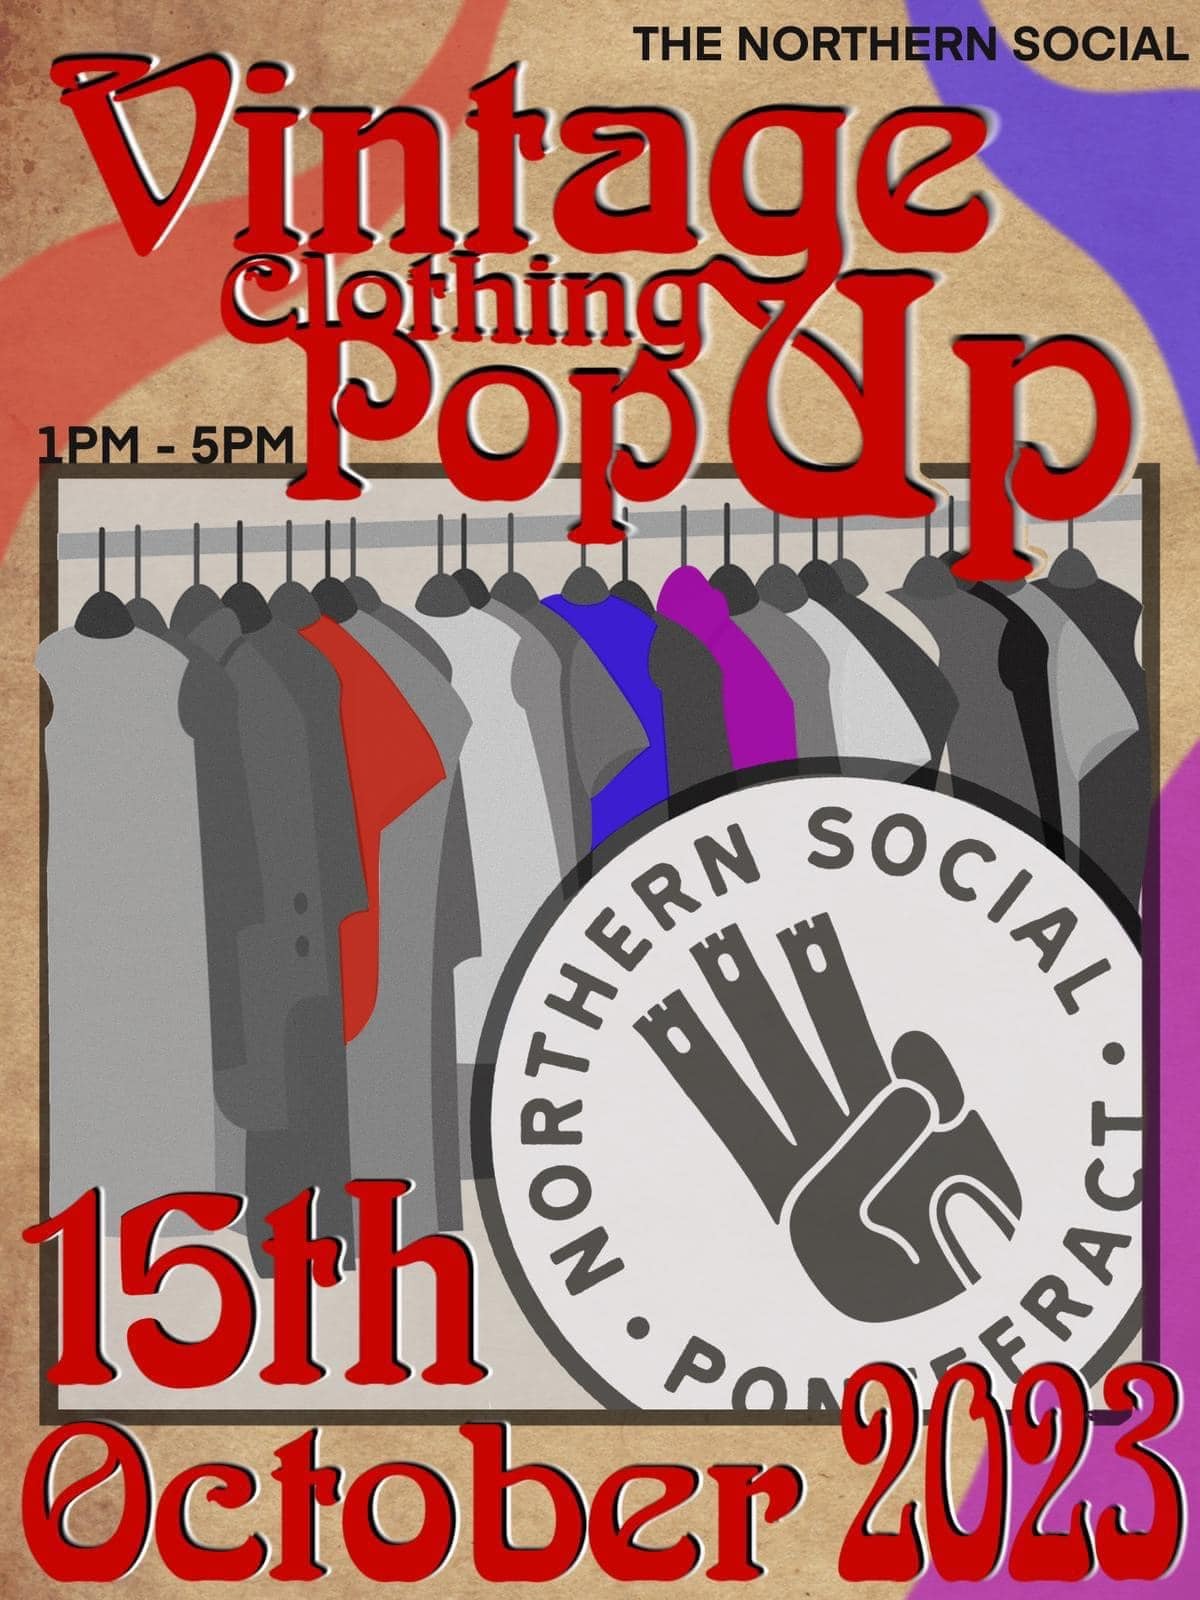 Poster of vintage clothing pop-up event